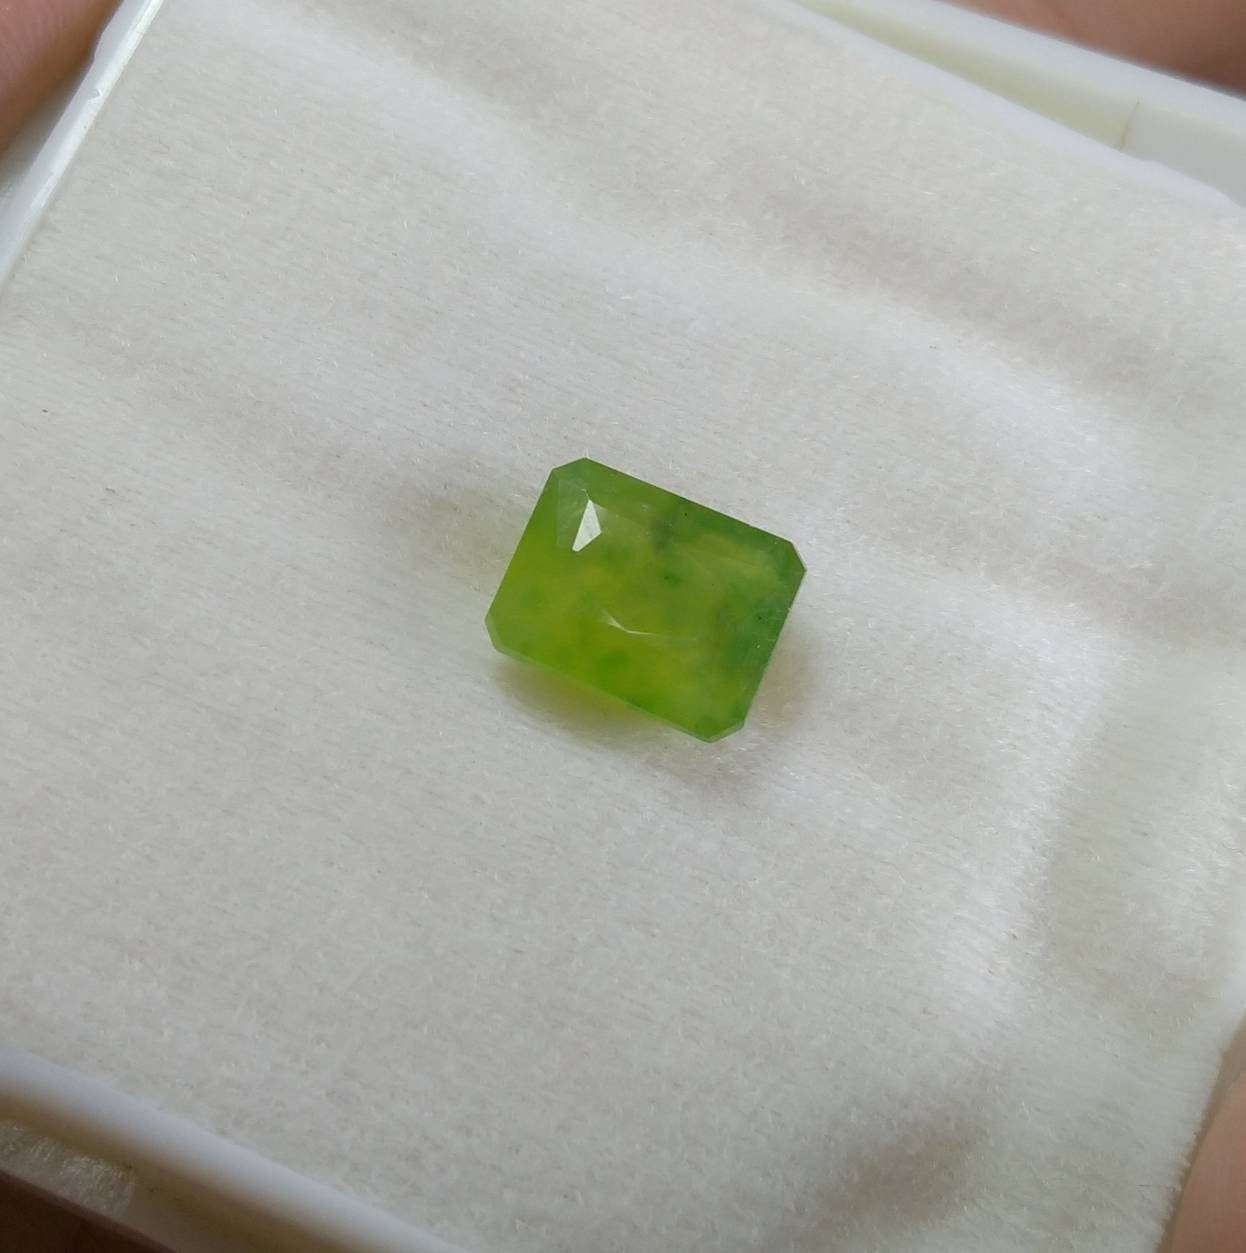 ARSAA GEMS AND MINERALSNatural fine quality beautiful 5.5 carat radiant shape faceted green hydrograssular garnet gem - Premium  from ARSAA GEMS AND MINERALS - Just $12.00! Shop now at ARSAA GEMS AND MINERALS